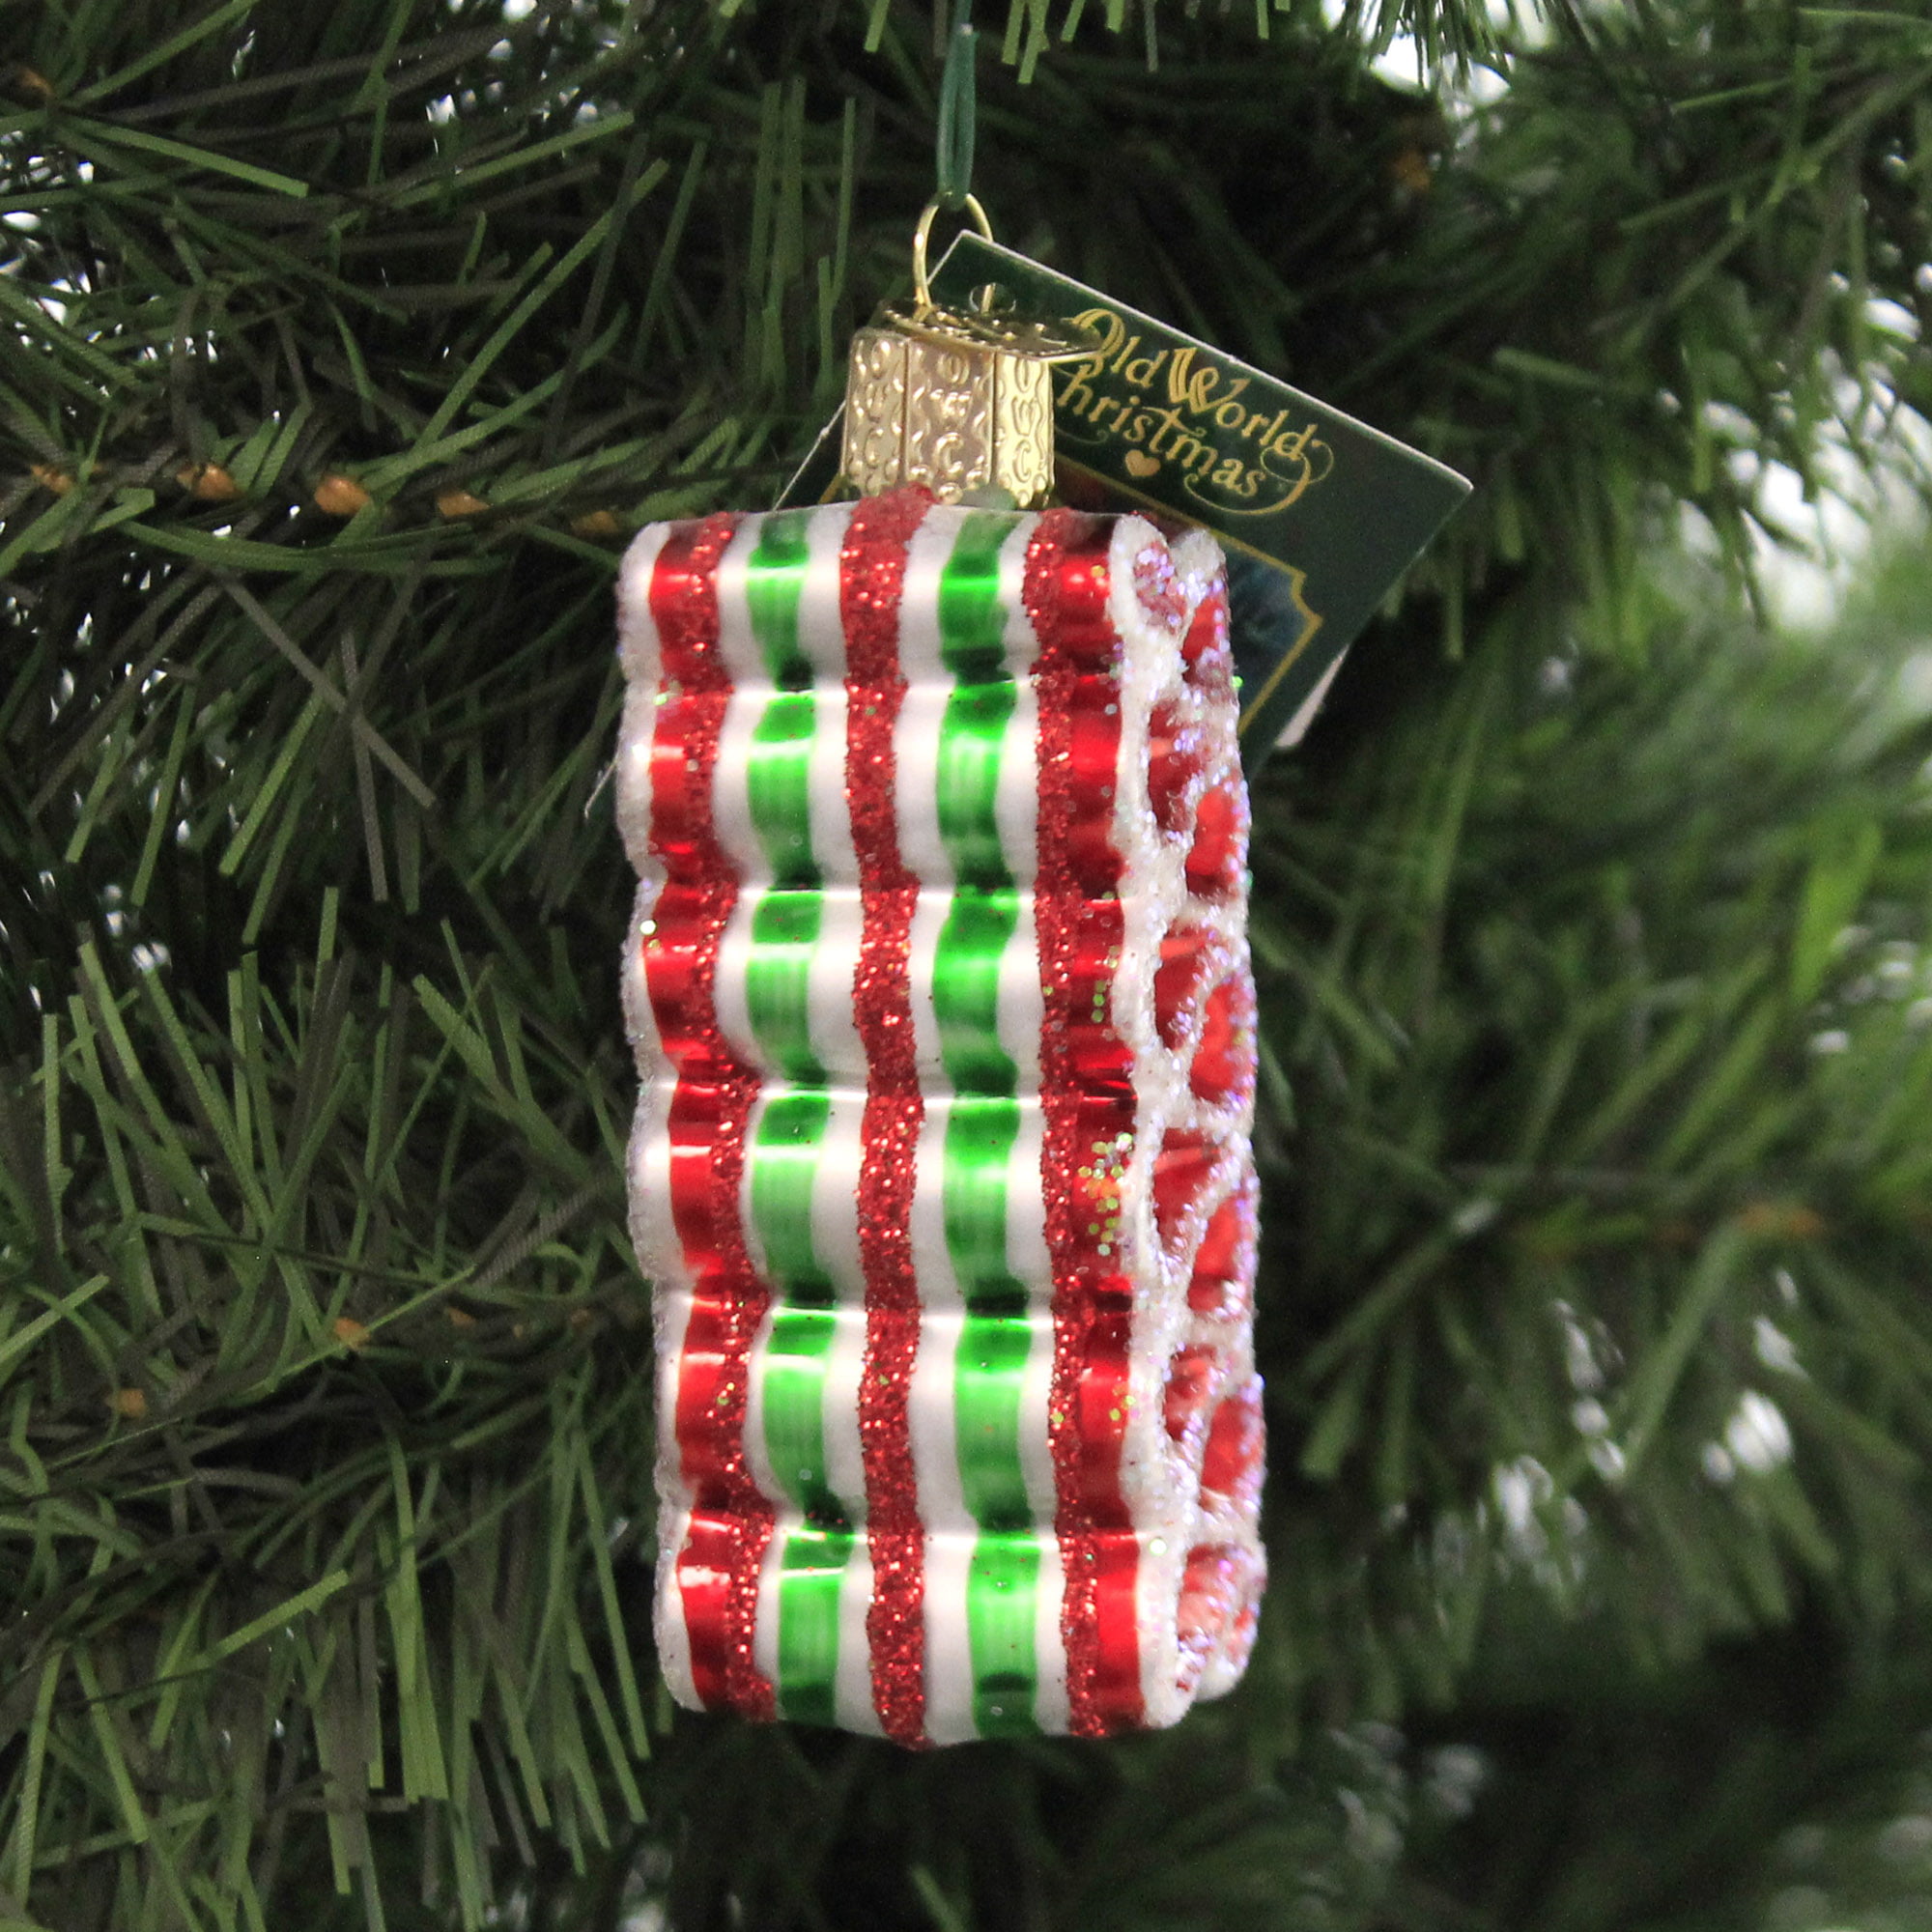 Ribbon Candy Glass Ornaments by Old World Christmas - your choice